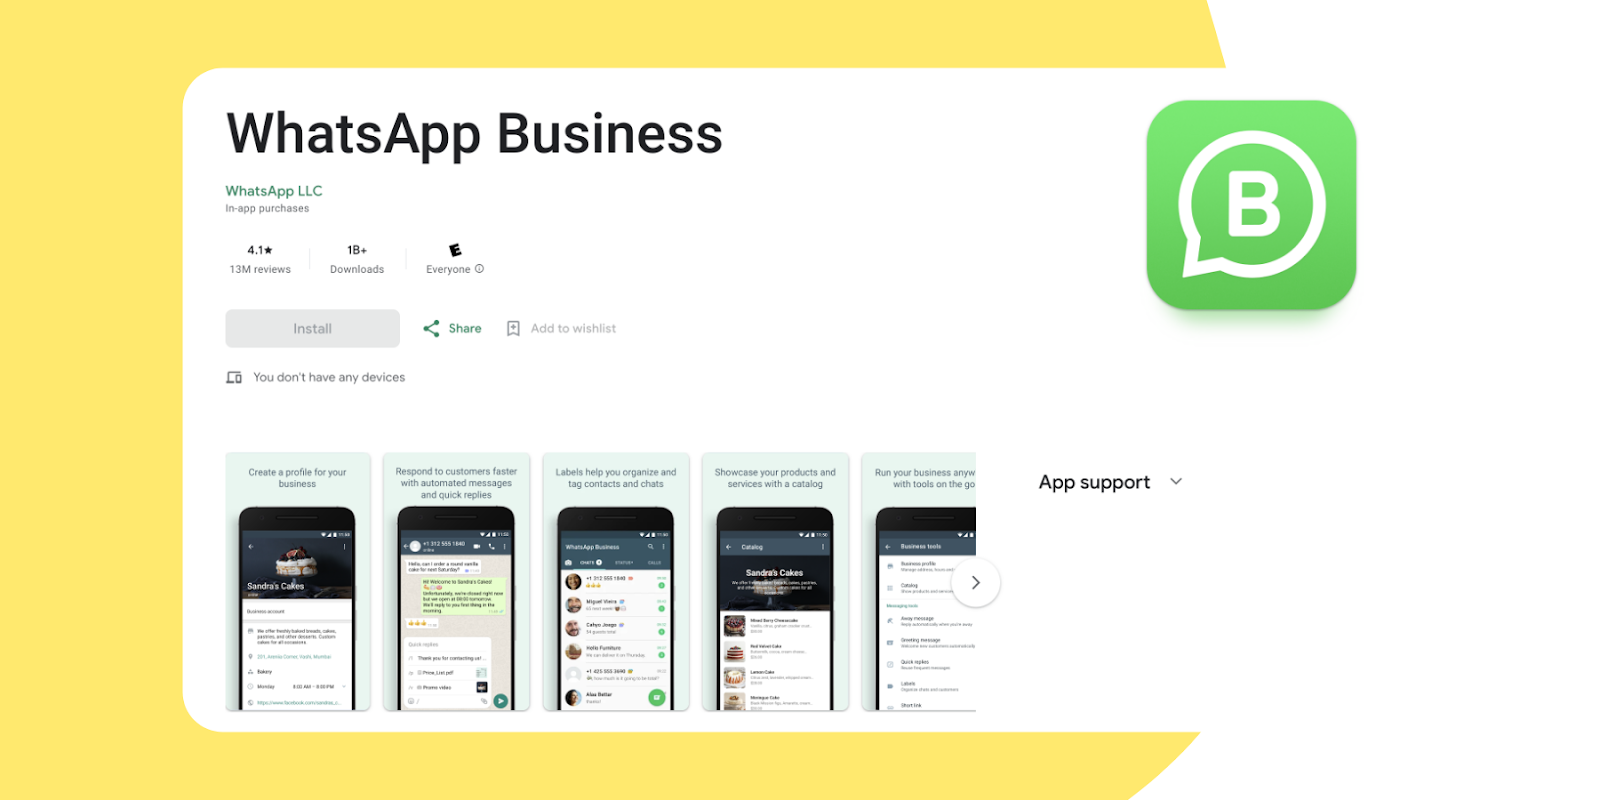 Whatsapp business play store page